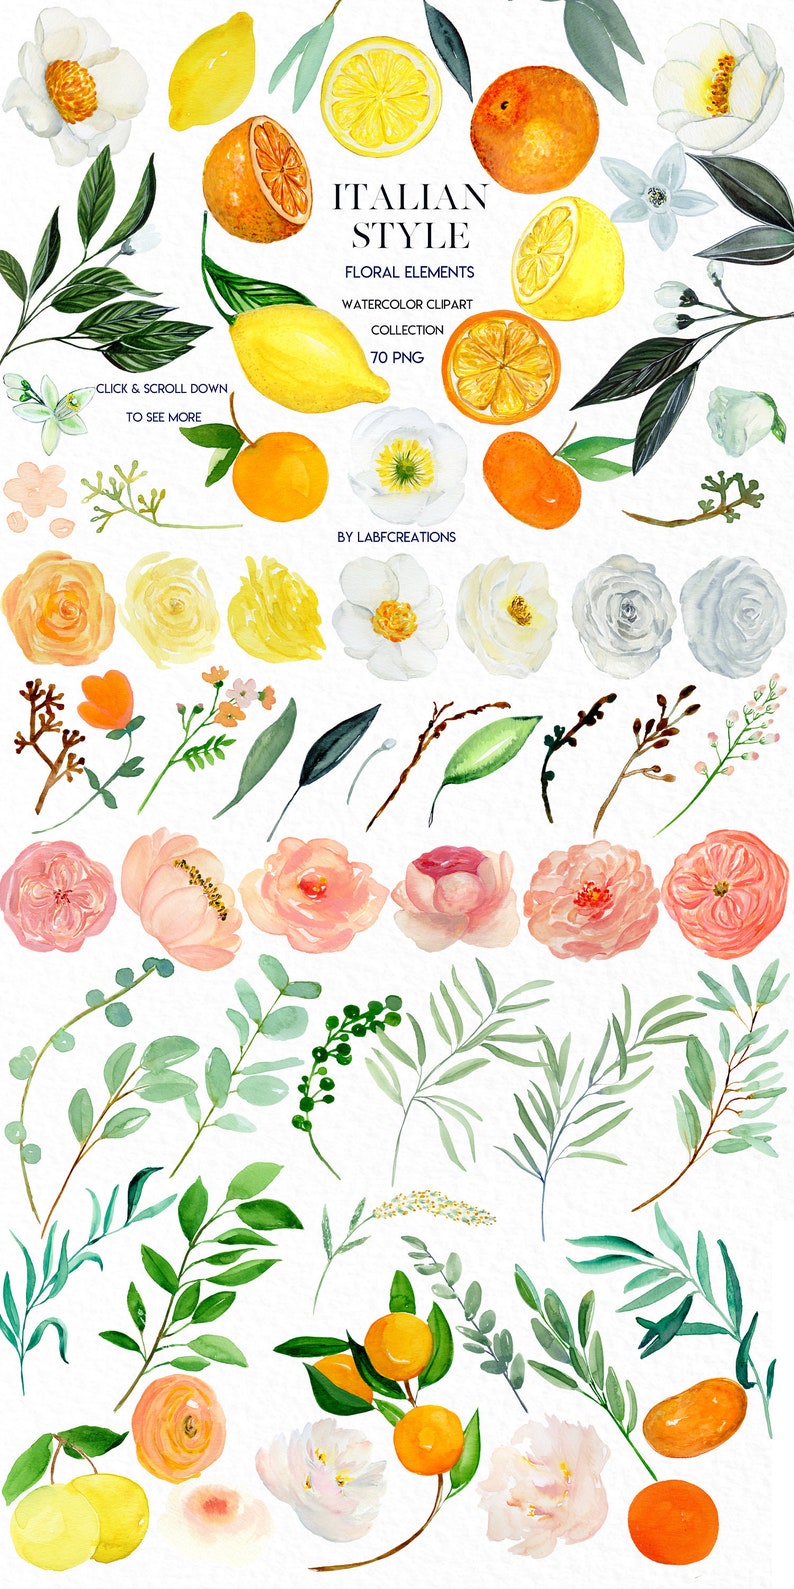 Italian Style. Floral Elements. Peach,yellow and white roses clip art, hand drawn. Lemons, oranges, citrus. Watercolor clip art . image 1